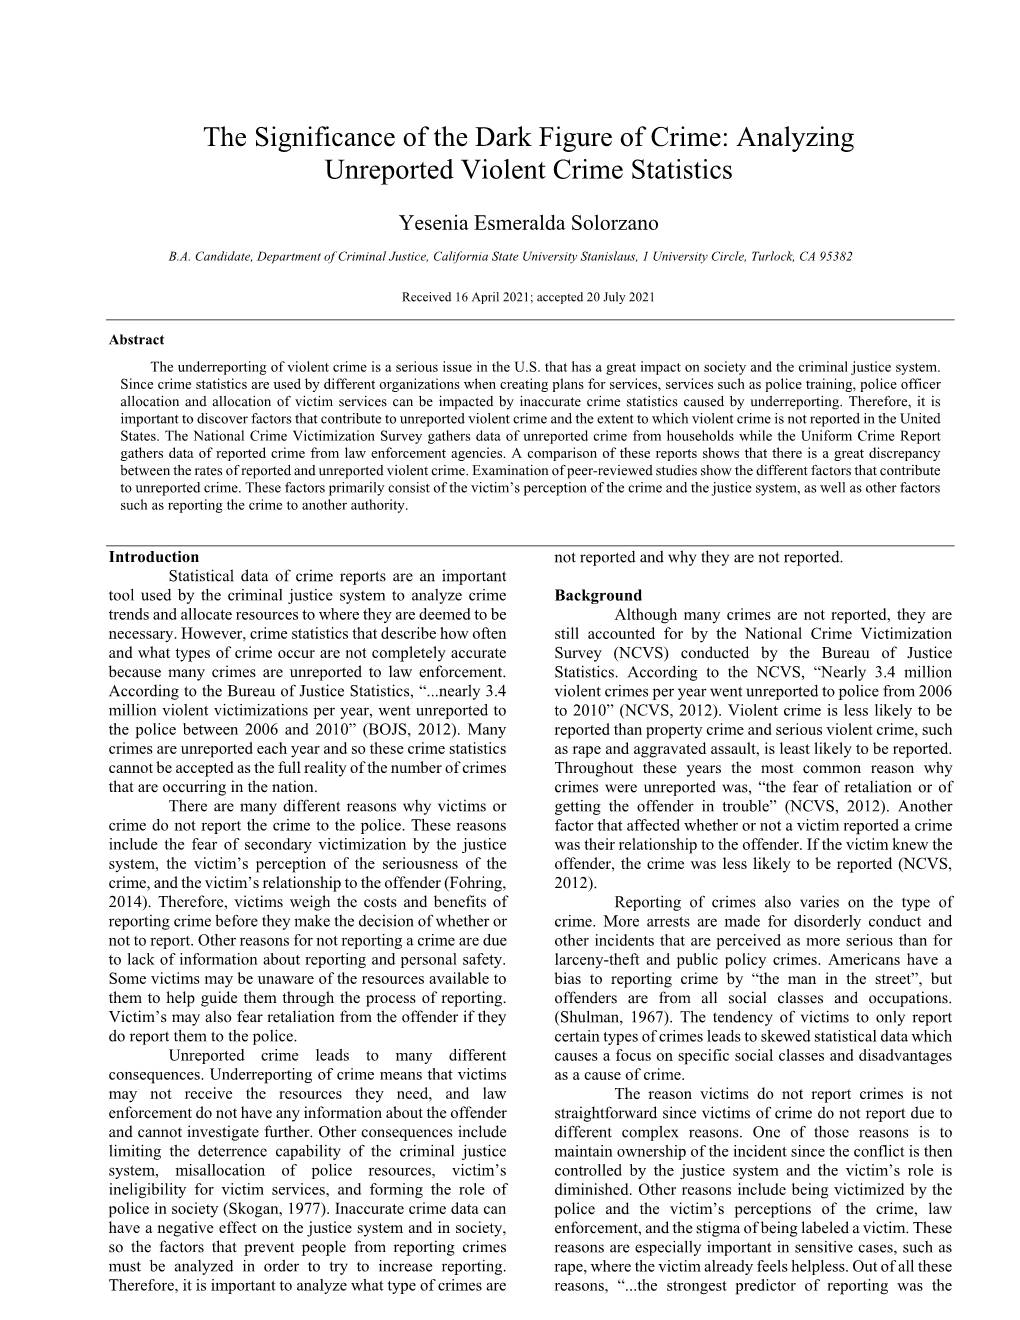 The Significance of the Dark Figure of Crime: Analyzing Unreported Violent Crime Statistics